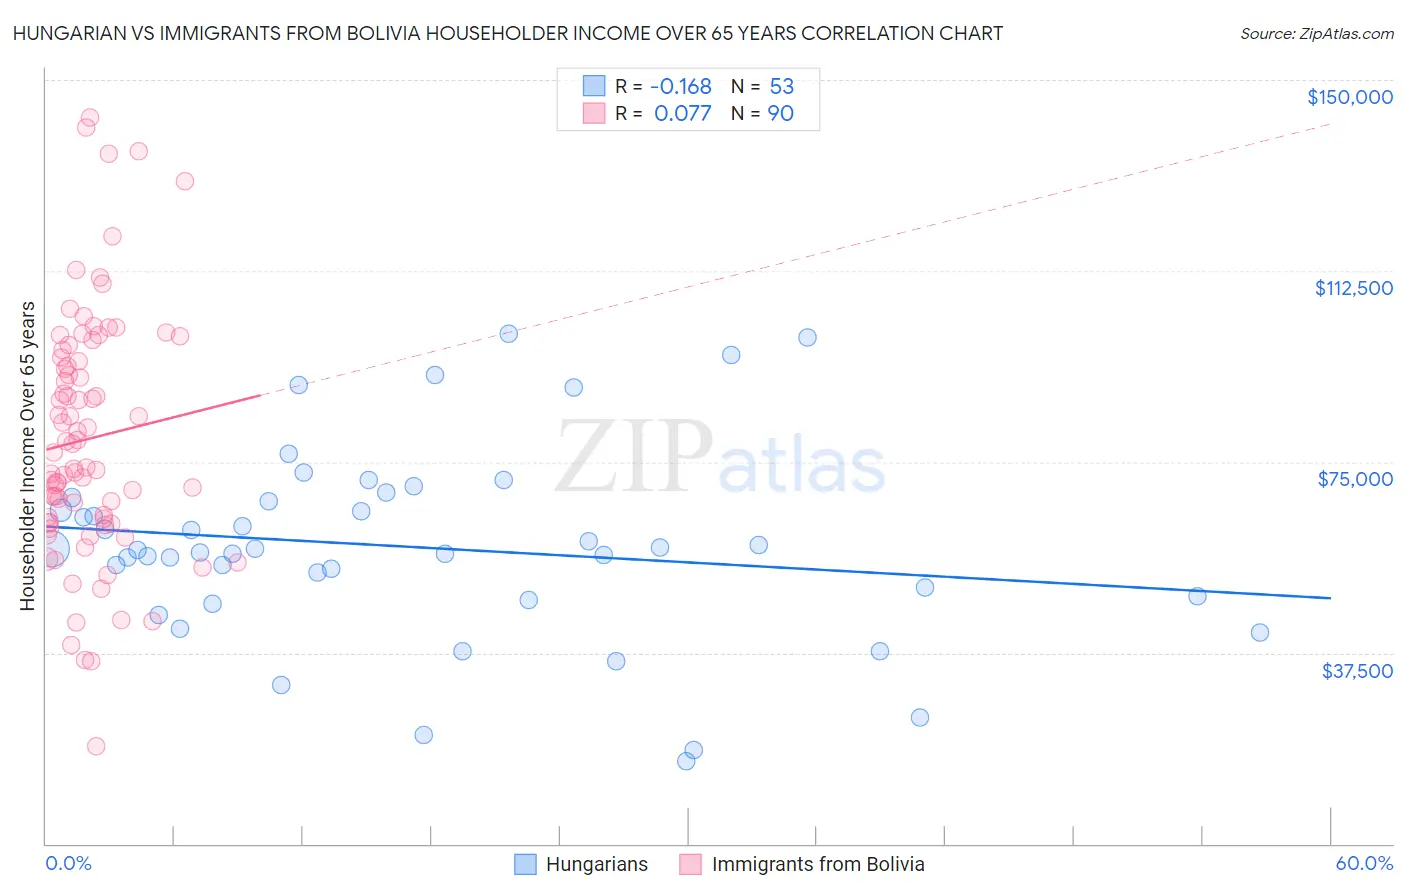 Hungarian vs Immigrants from Bolivia Householder Income Over 65 years